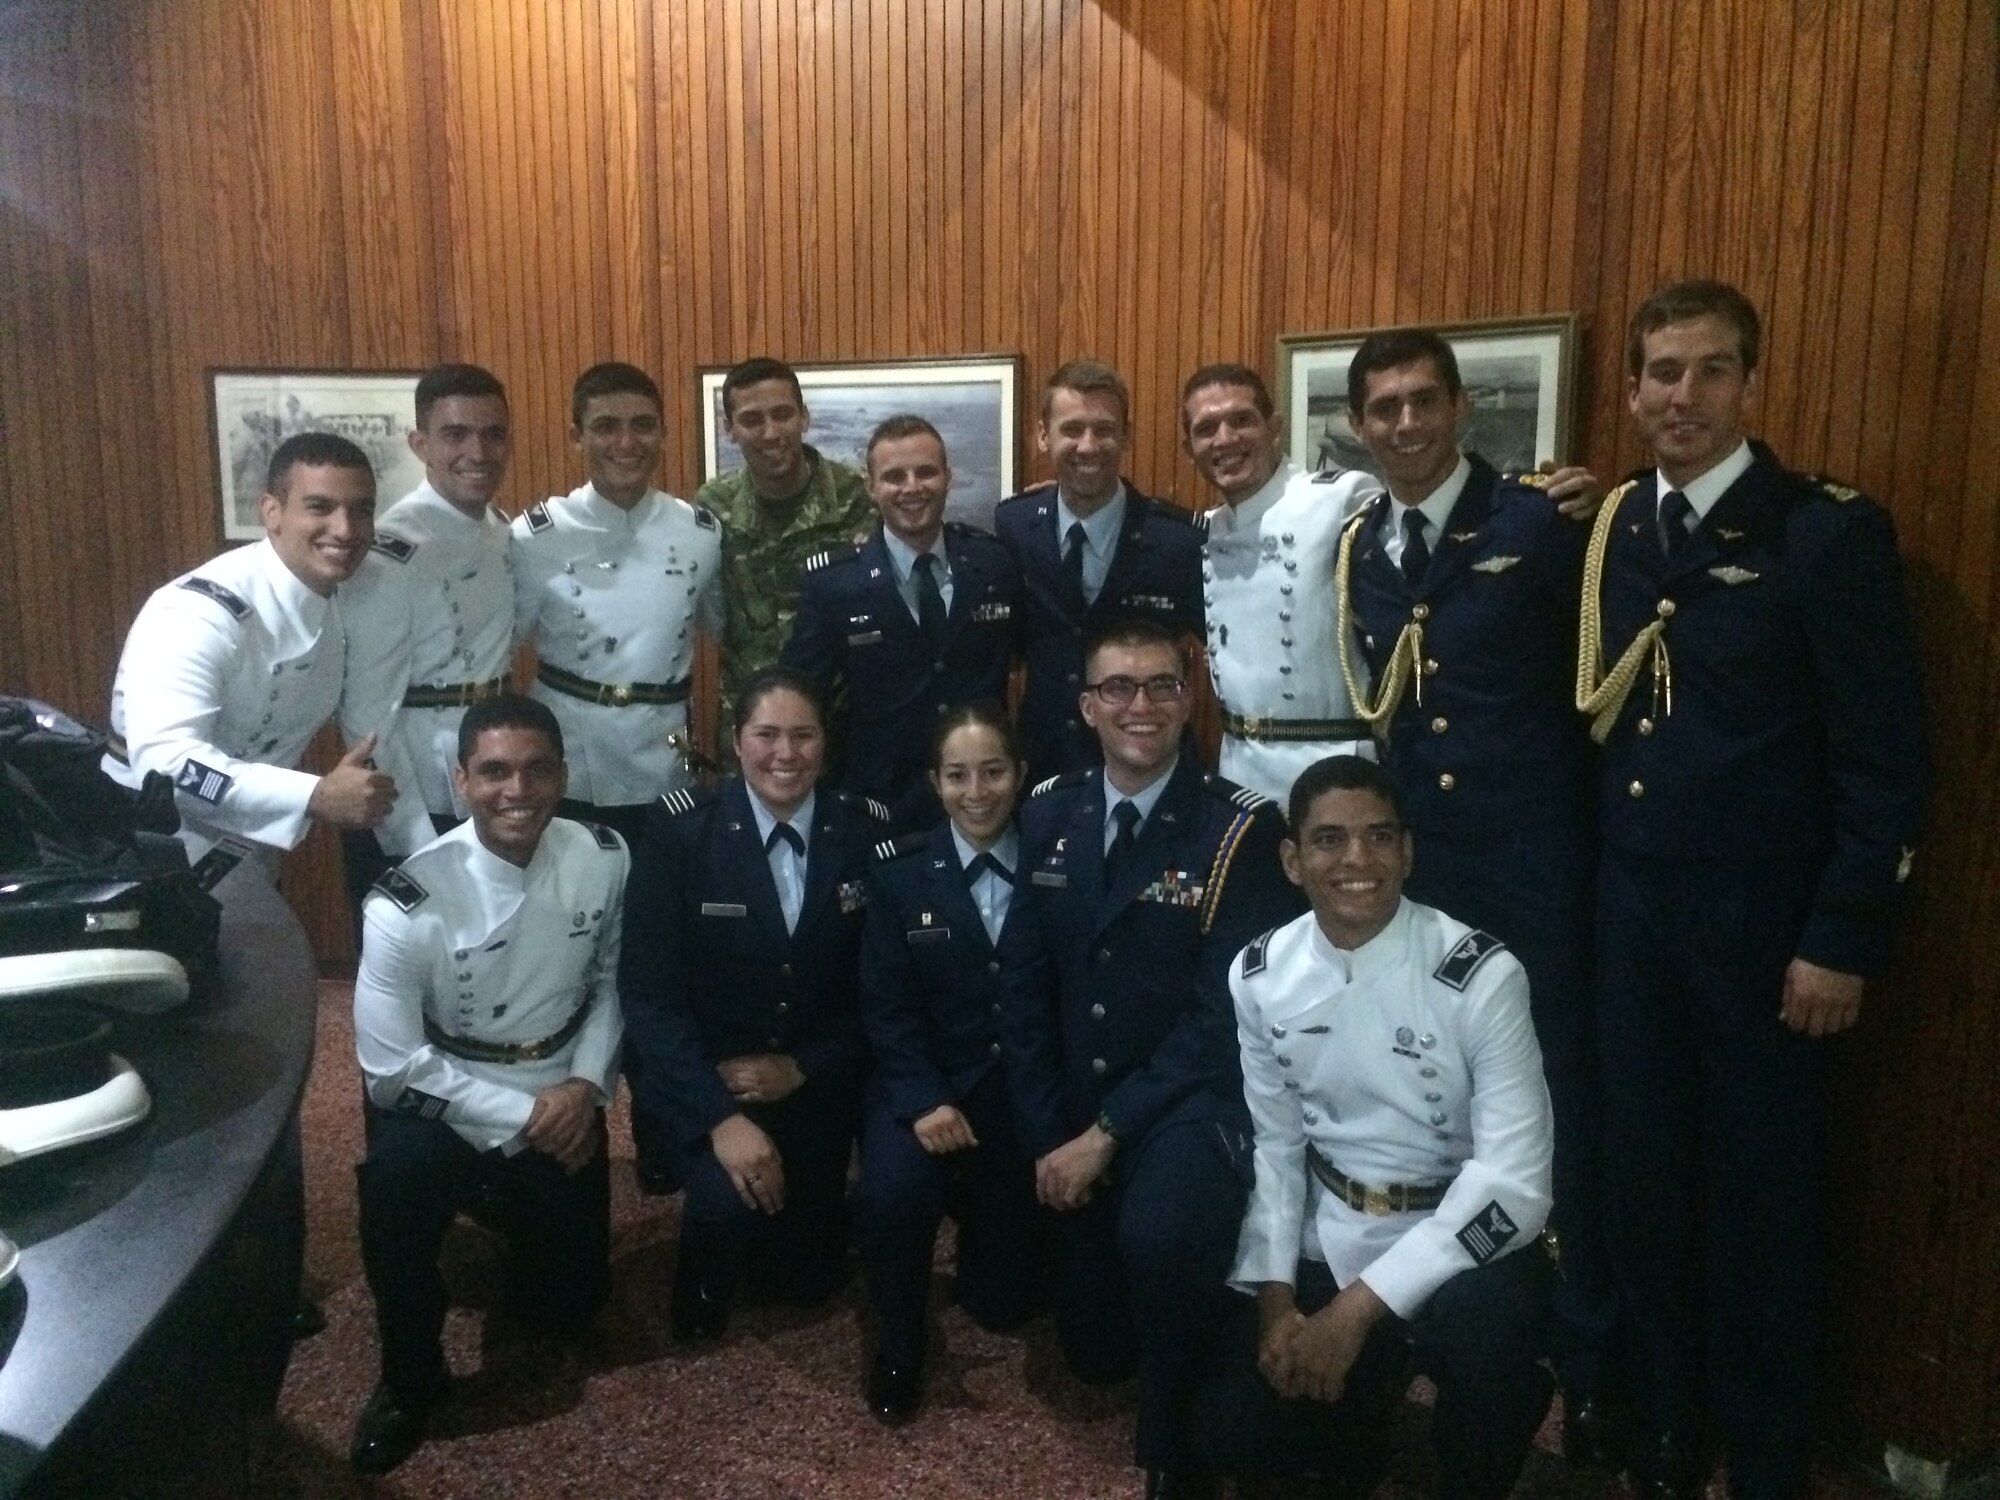 Air Force Reserve Officer Training Corps cadets visit with Uruguayan Air Force Academy students for their 100th anniversary celebration, Nov. 22, 2016. The Uraguayan Air Force Academy, Escuela Militar de Aeronáutica, extended the invitation to AFROTC to come join in their celebration. (Courtesy Photo)